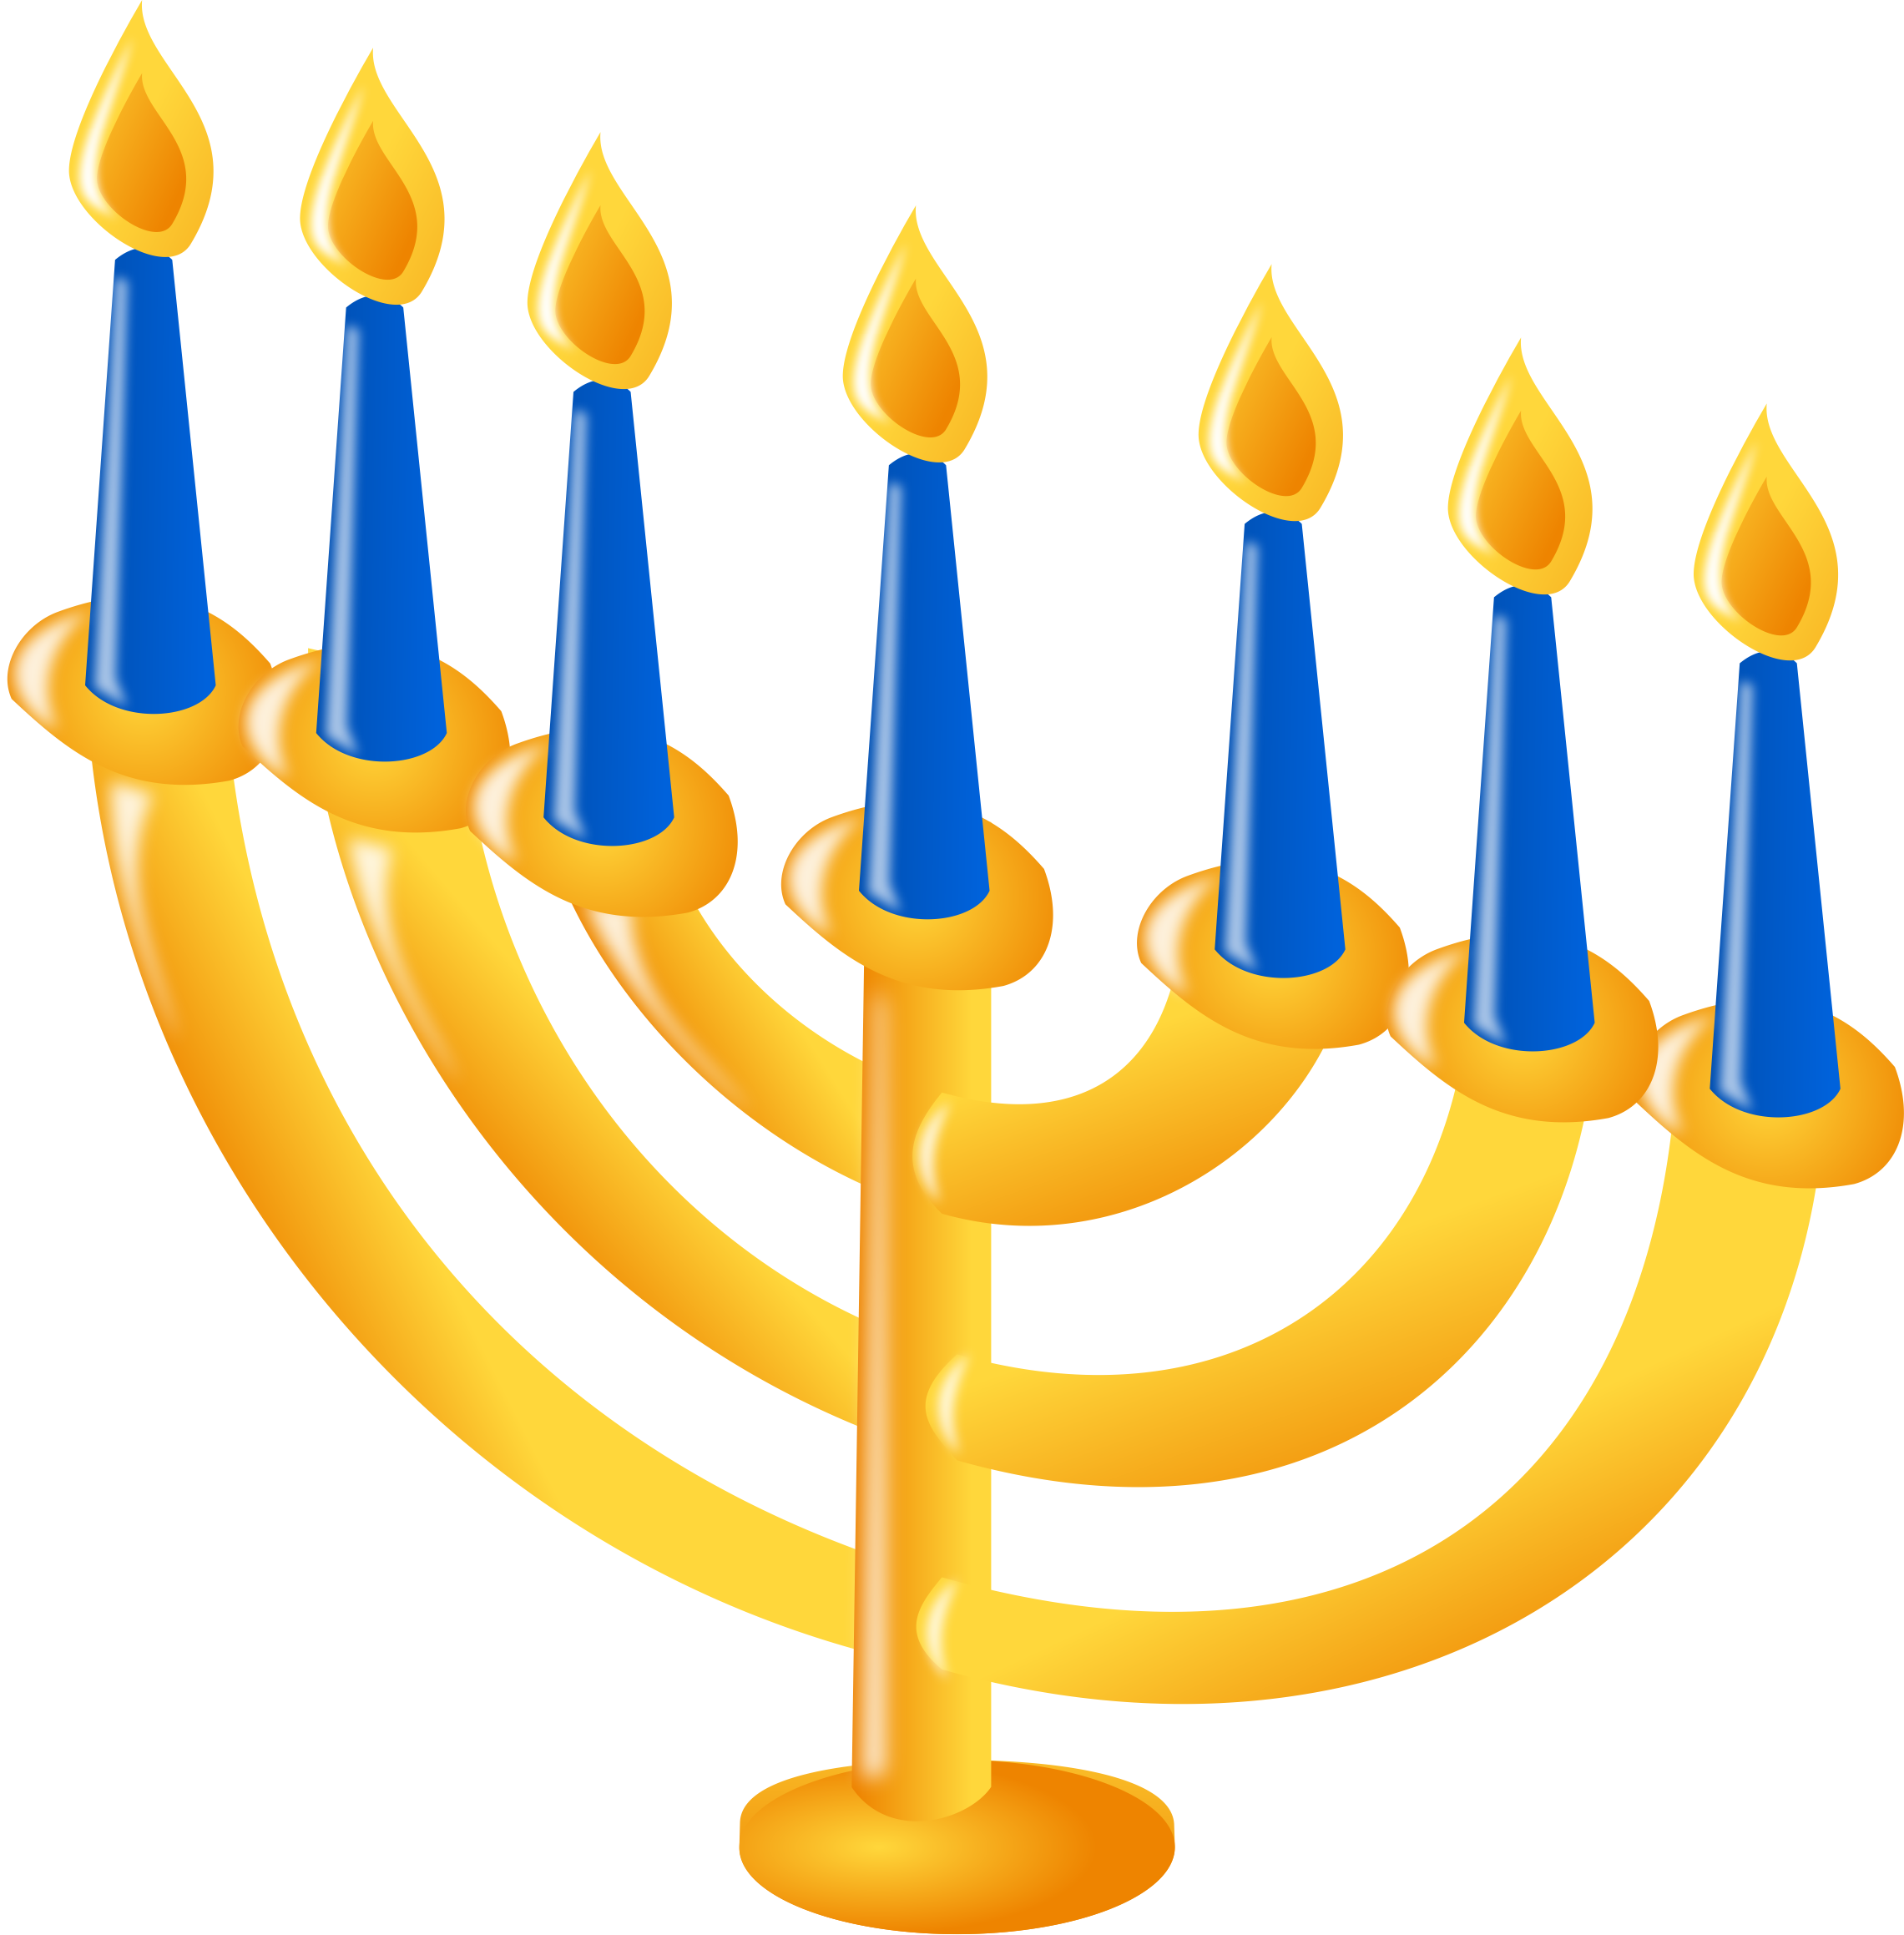 Join Us For A Community Candle Lighting On Monday, - Menorah Transparent Background (2281x2318)